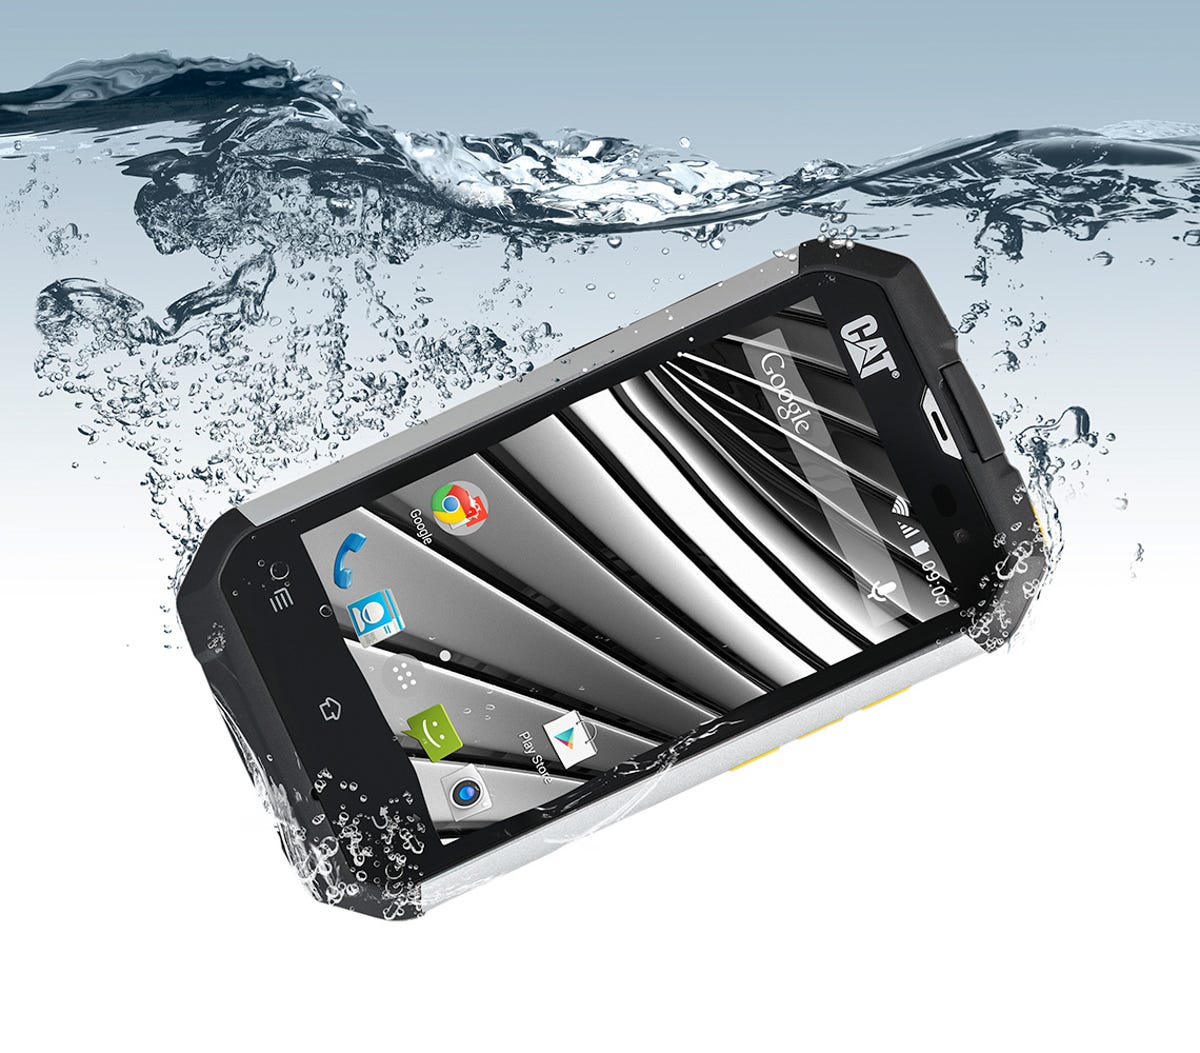 large-image-product-page-water-drop.jpg